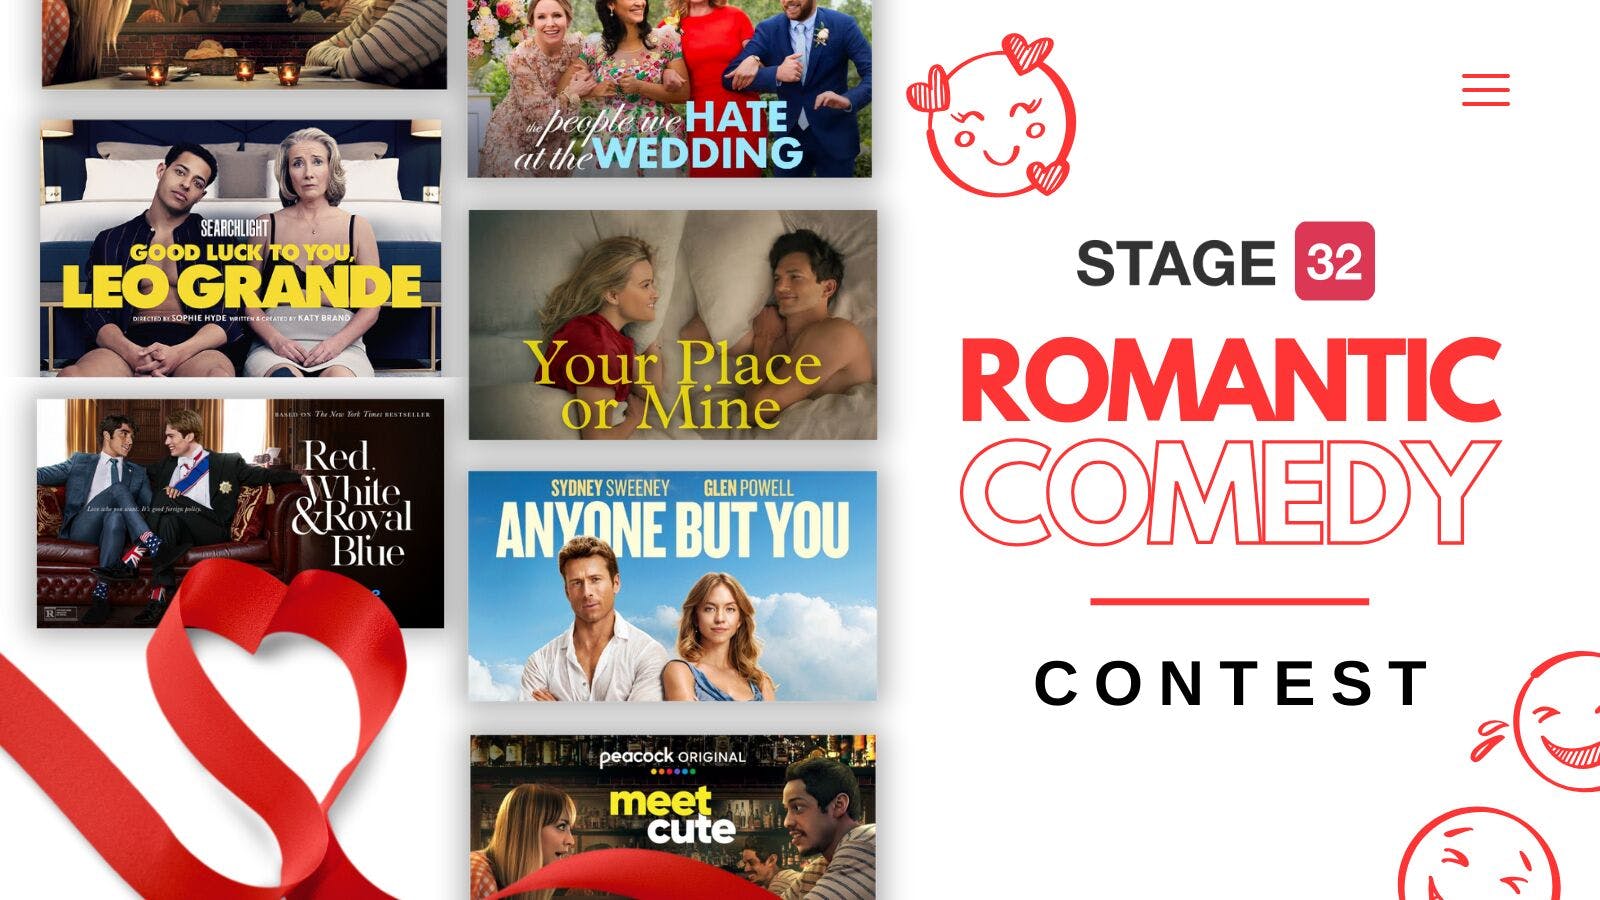 Announcing the 3rd Annual Romantic Comedy Screenwriting Contest